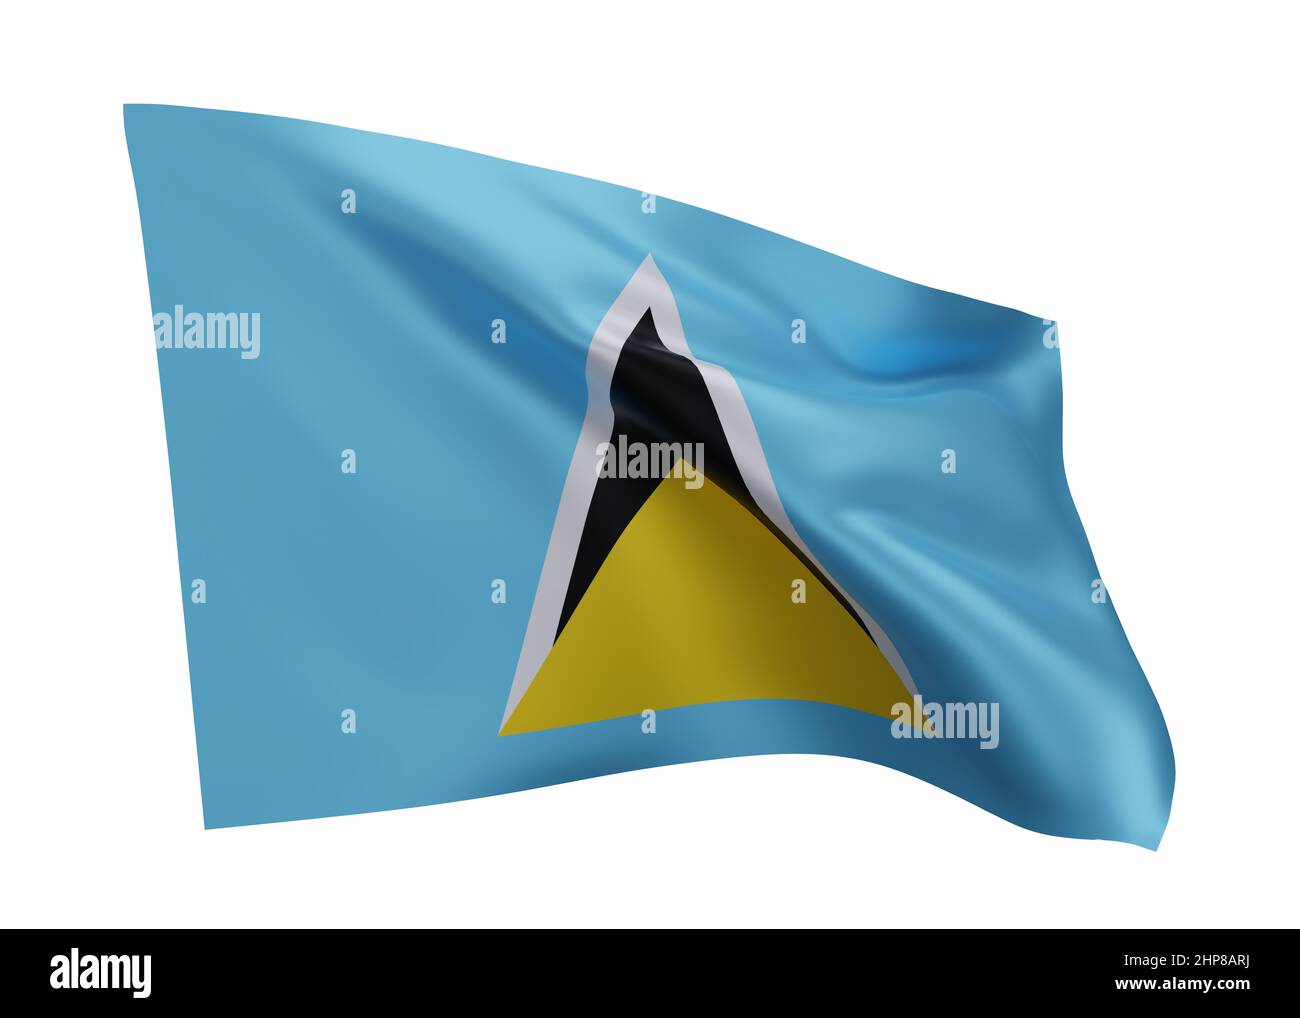 3d illustration flag of Saint Lucia. Saint Lucia high resolution flag isolated against white background. 3d rendering Stock Photo